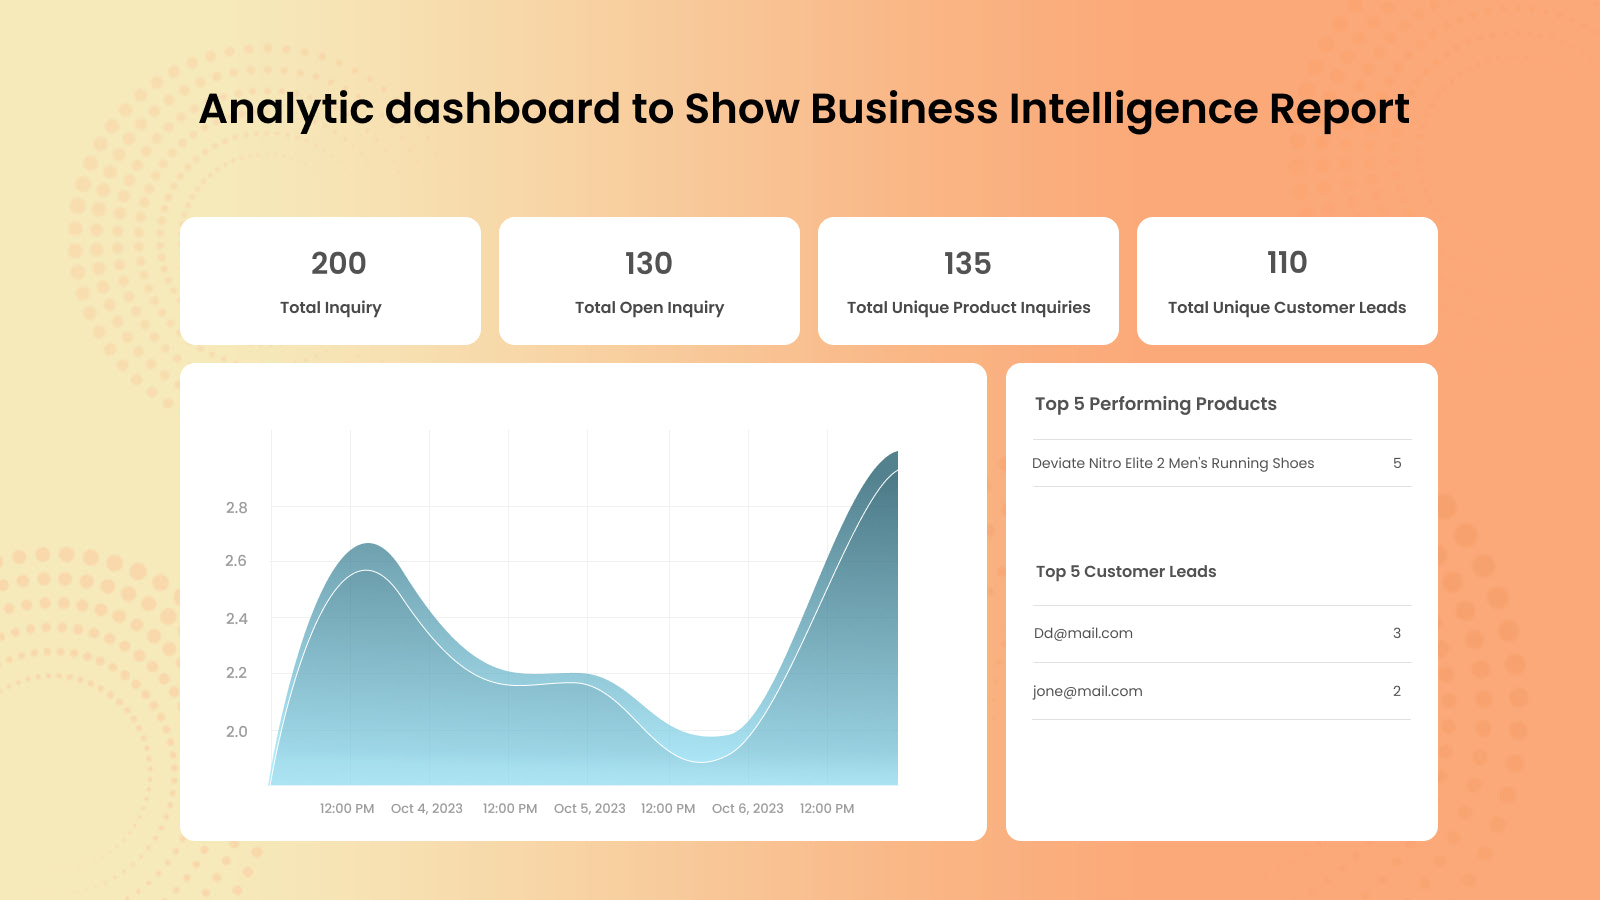 Analytic dashboard to Show Business Intelligence Report